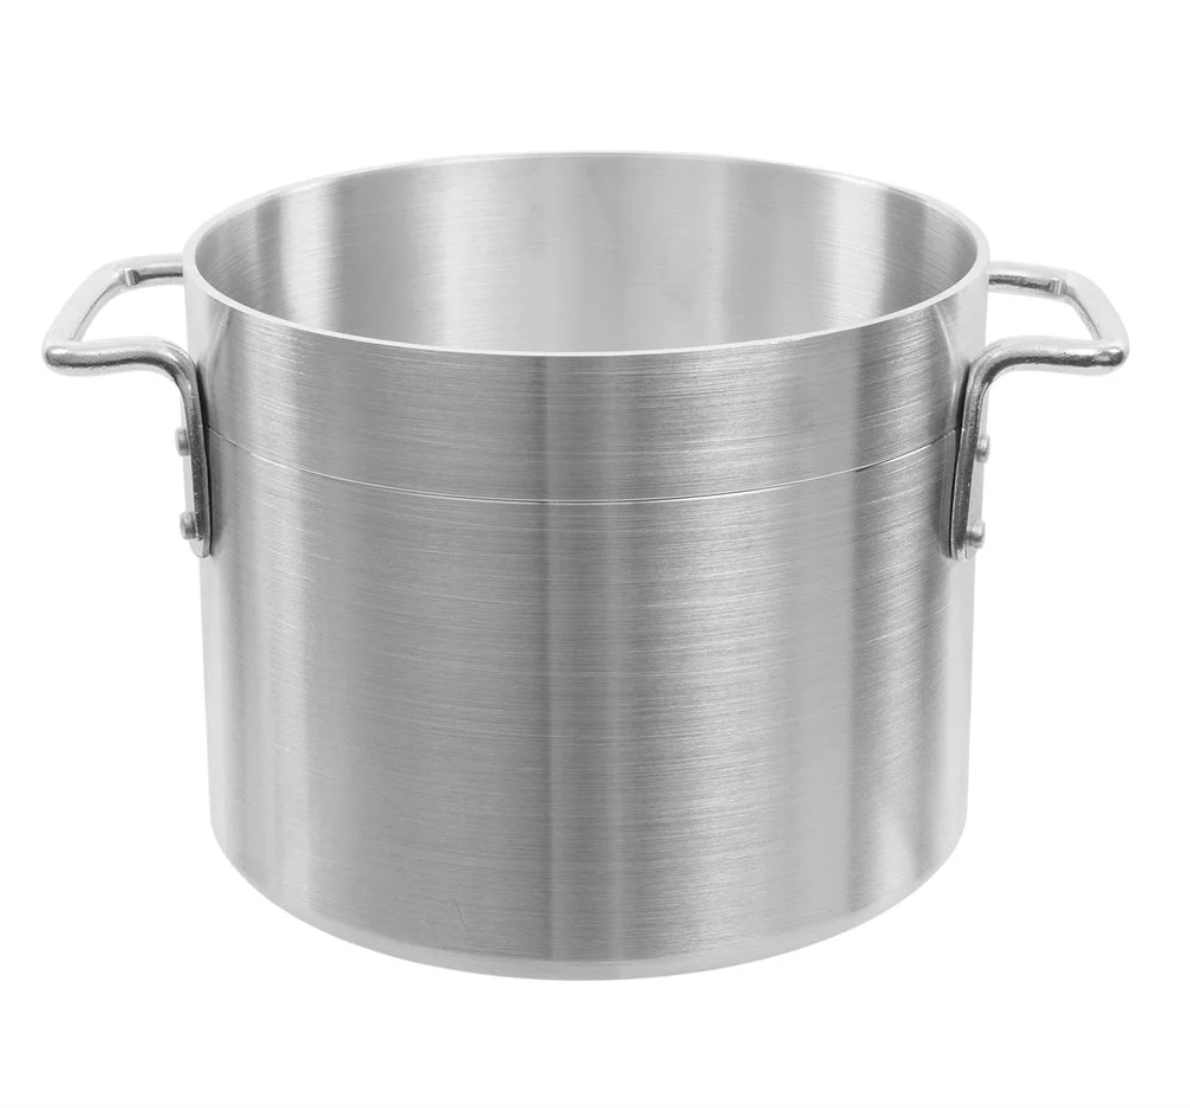 Aluminum Stock Pot With Cover